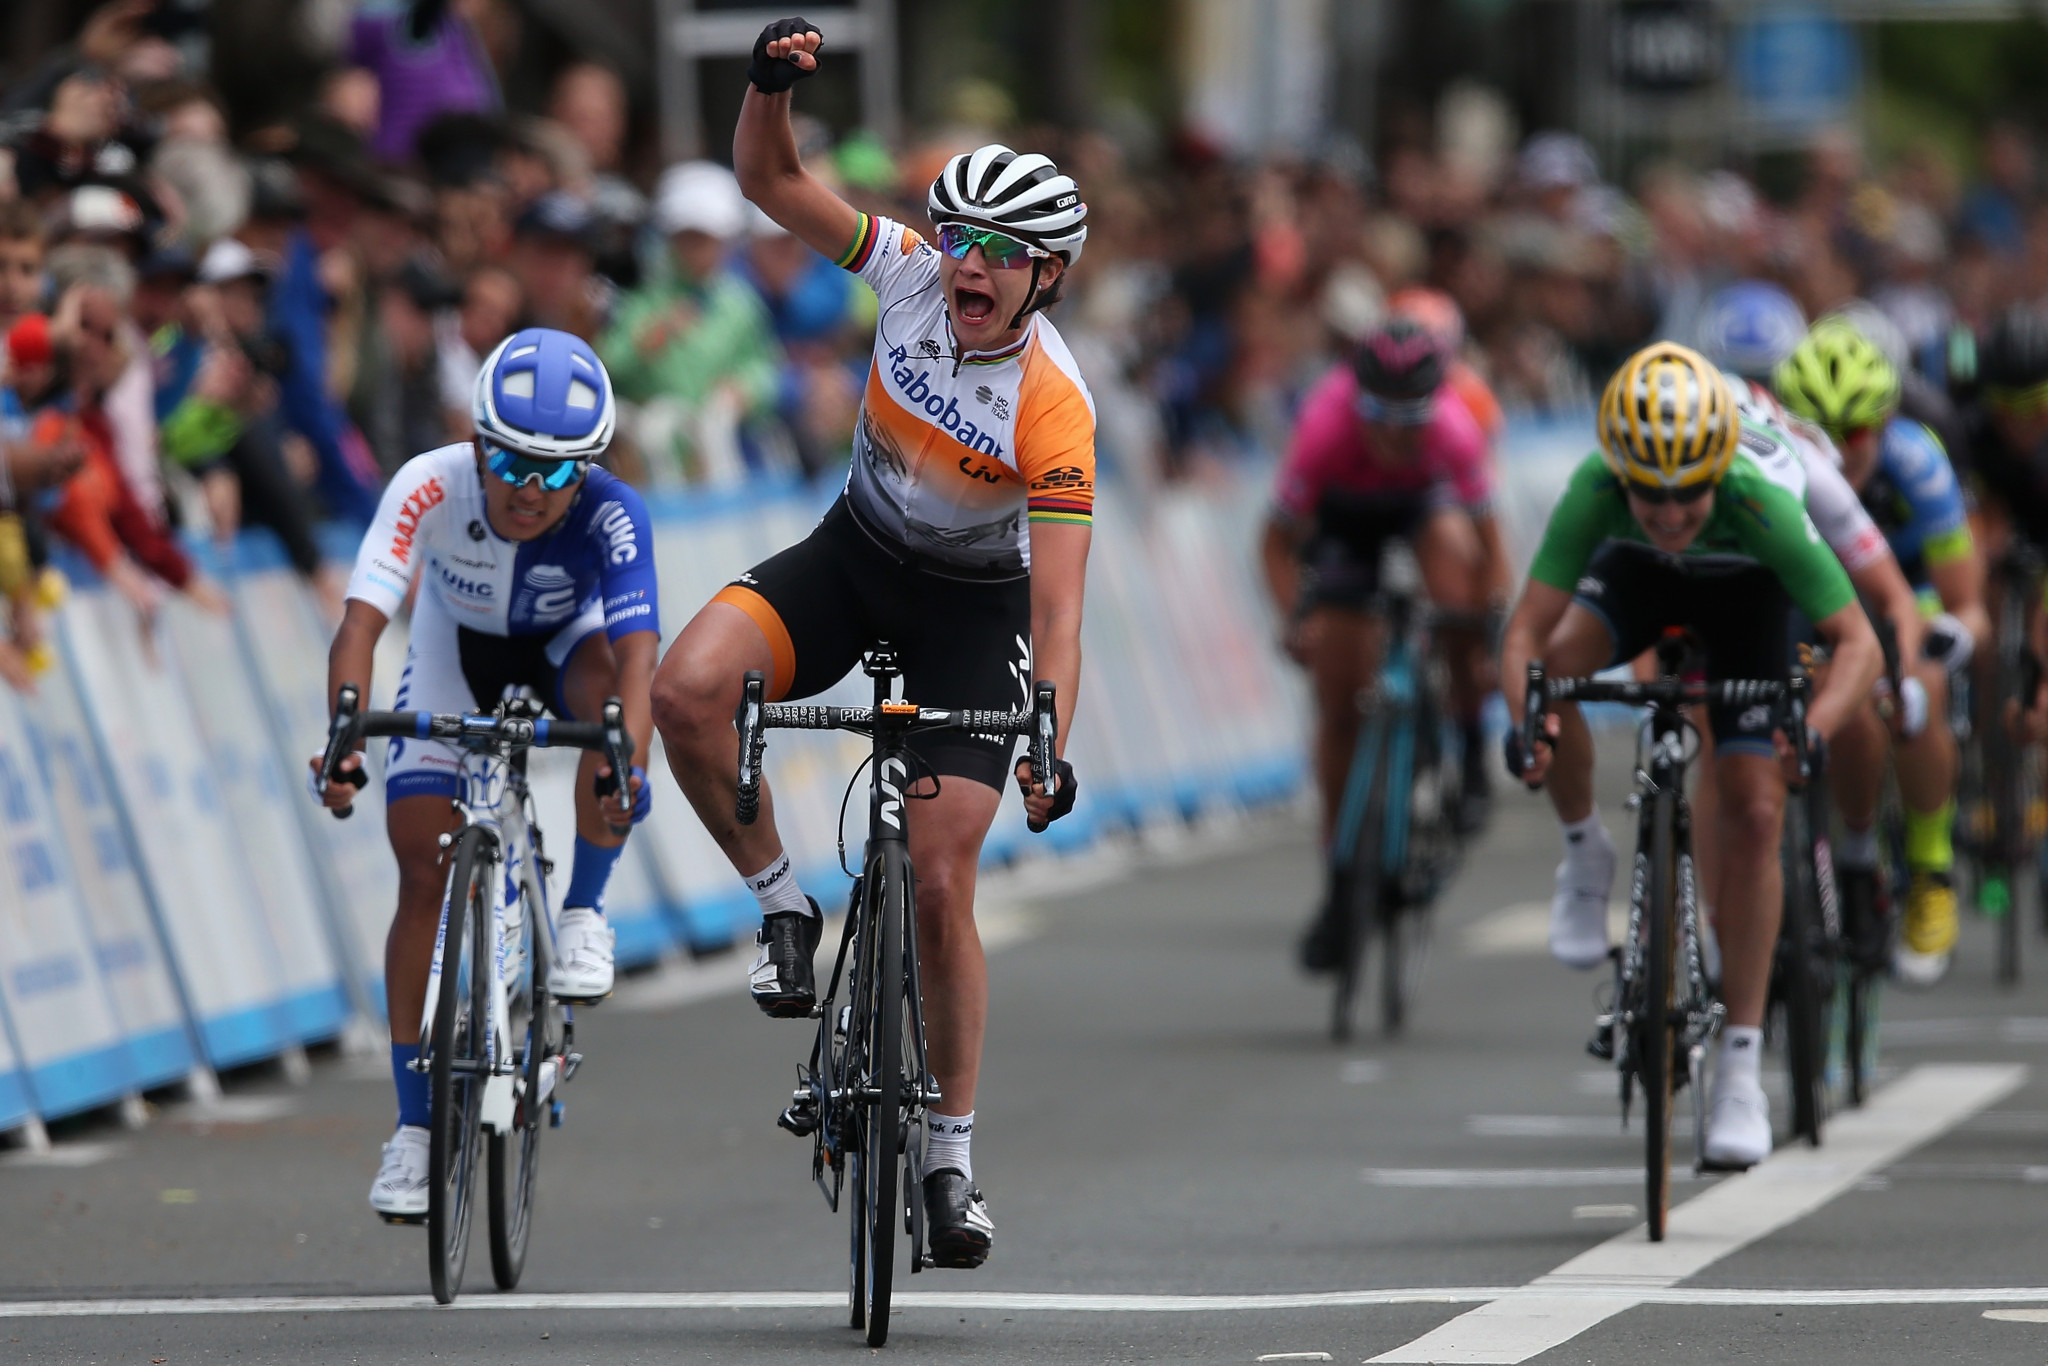 Vos takes stage four of Holland Ladies Tour following dramatic sprint finish